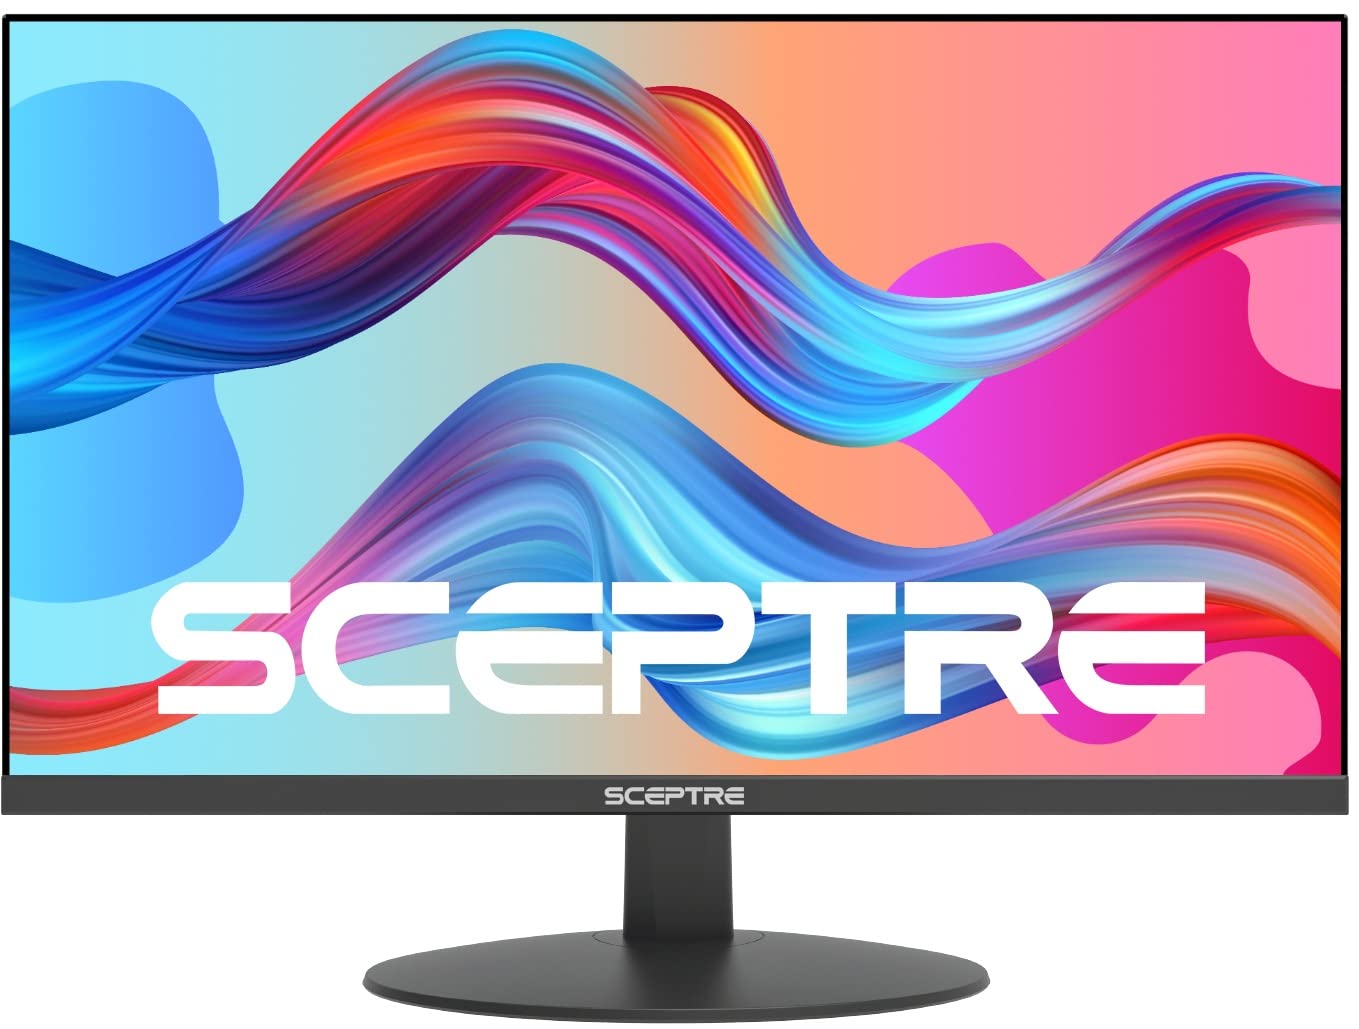 Sceptre IPS 27-Inch Business Computer Monitor 1080p 75Hz with HDMI VGA Build-in Speakers, Machine Black 2020 (E275W-FPT), 27